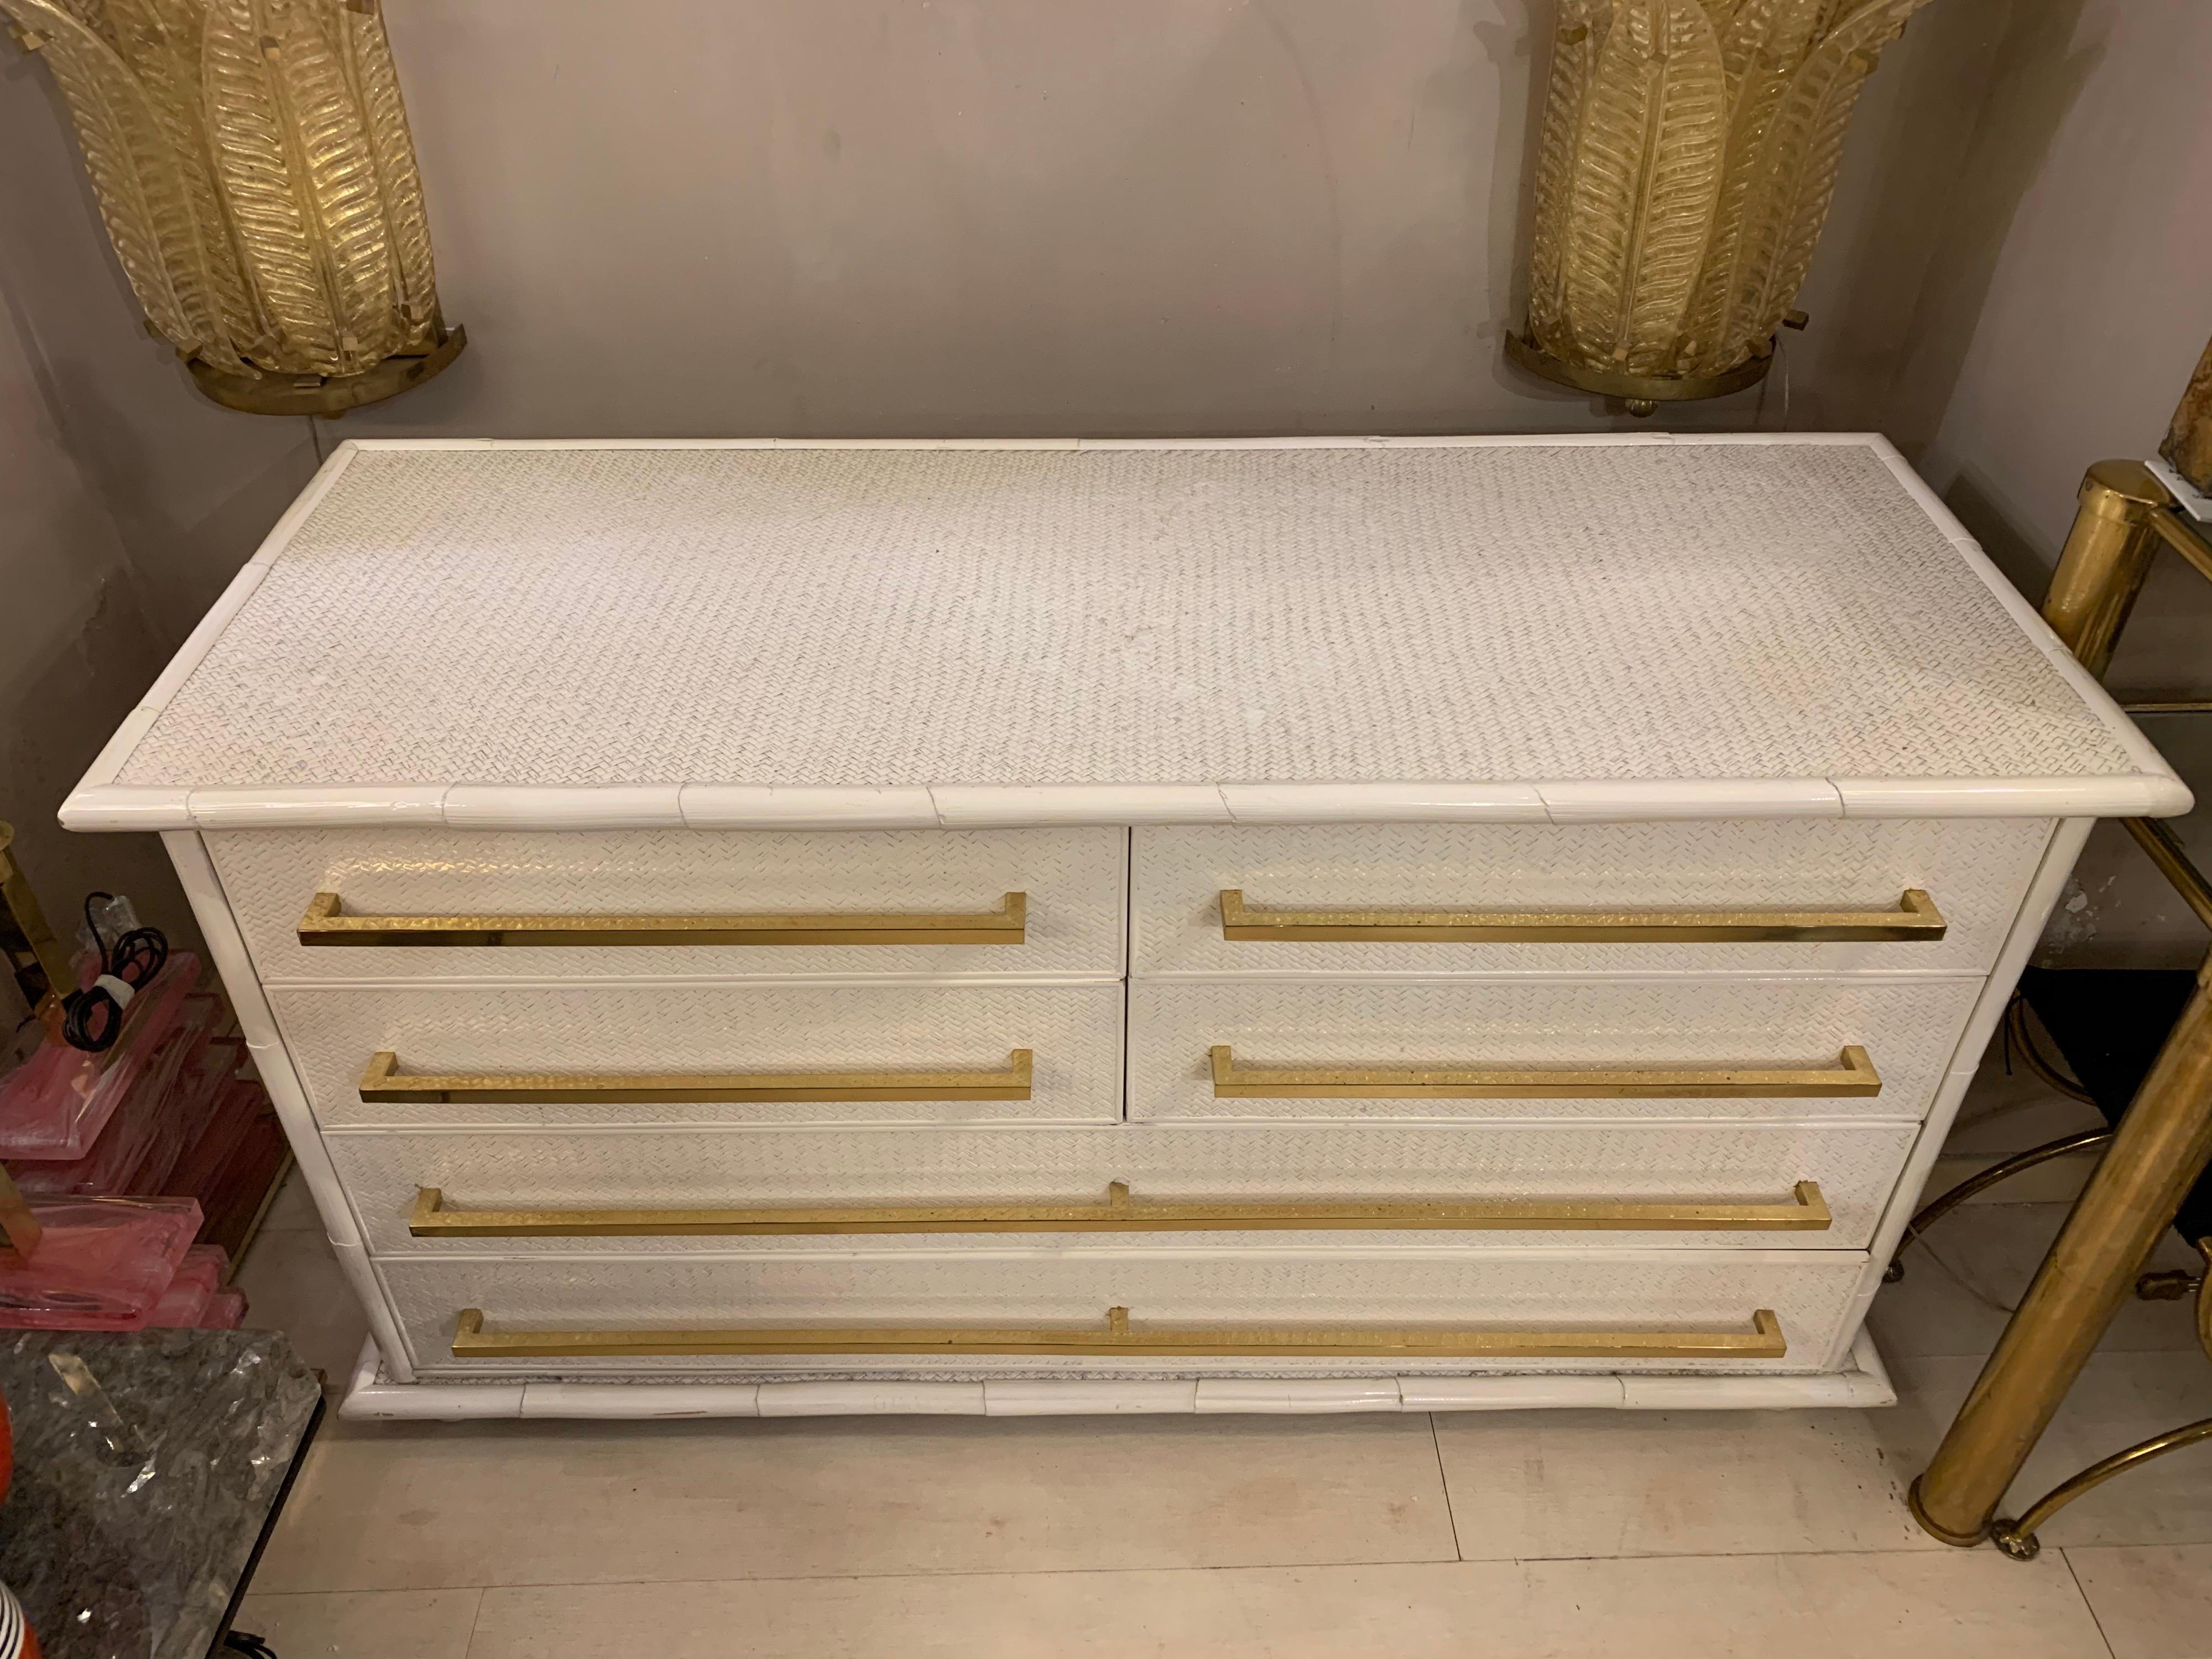 Italian white lacquered bamboo and rattan chest of drawers by Vivai del Sud. The chest has 6 drawers (2 big and 4 smaller) with brass handles.
    